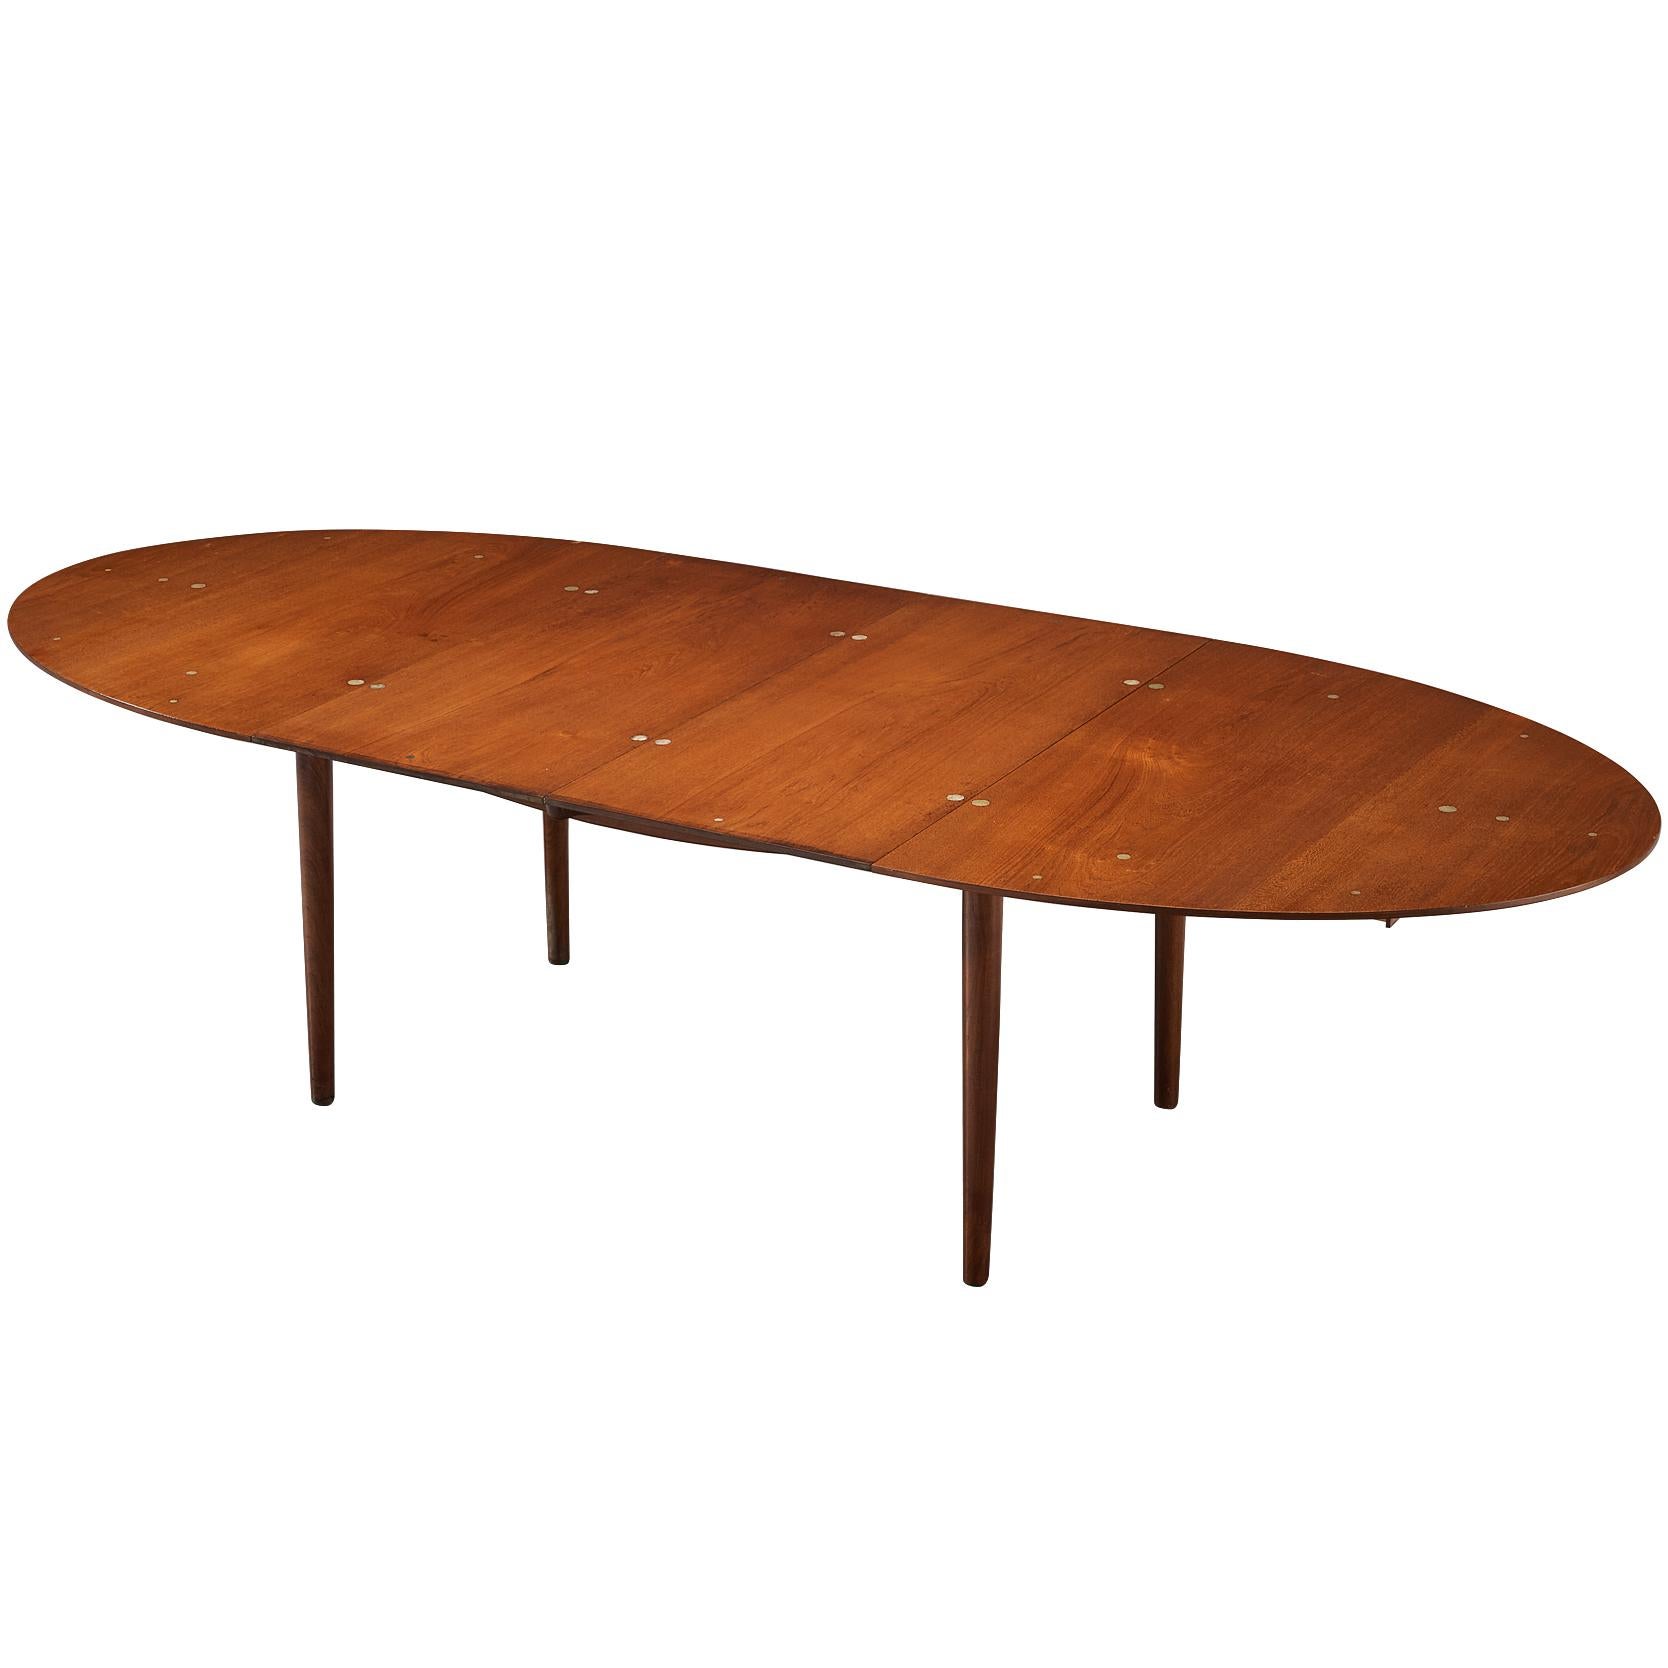 Finn Juhl for Niels Vodder Dining Table ‘Judas’ in Teak and Silver Inlay